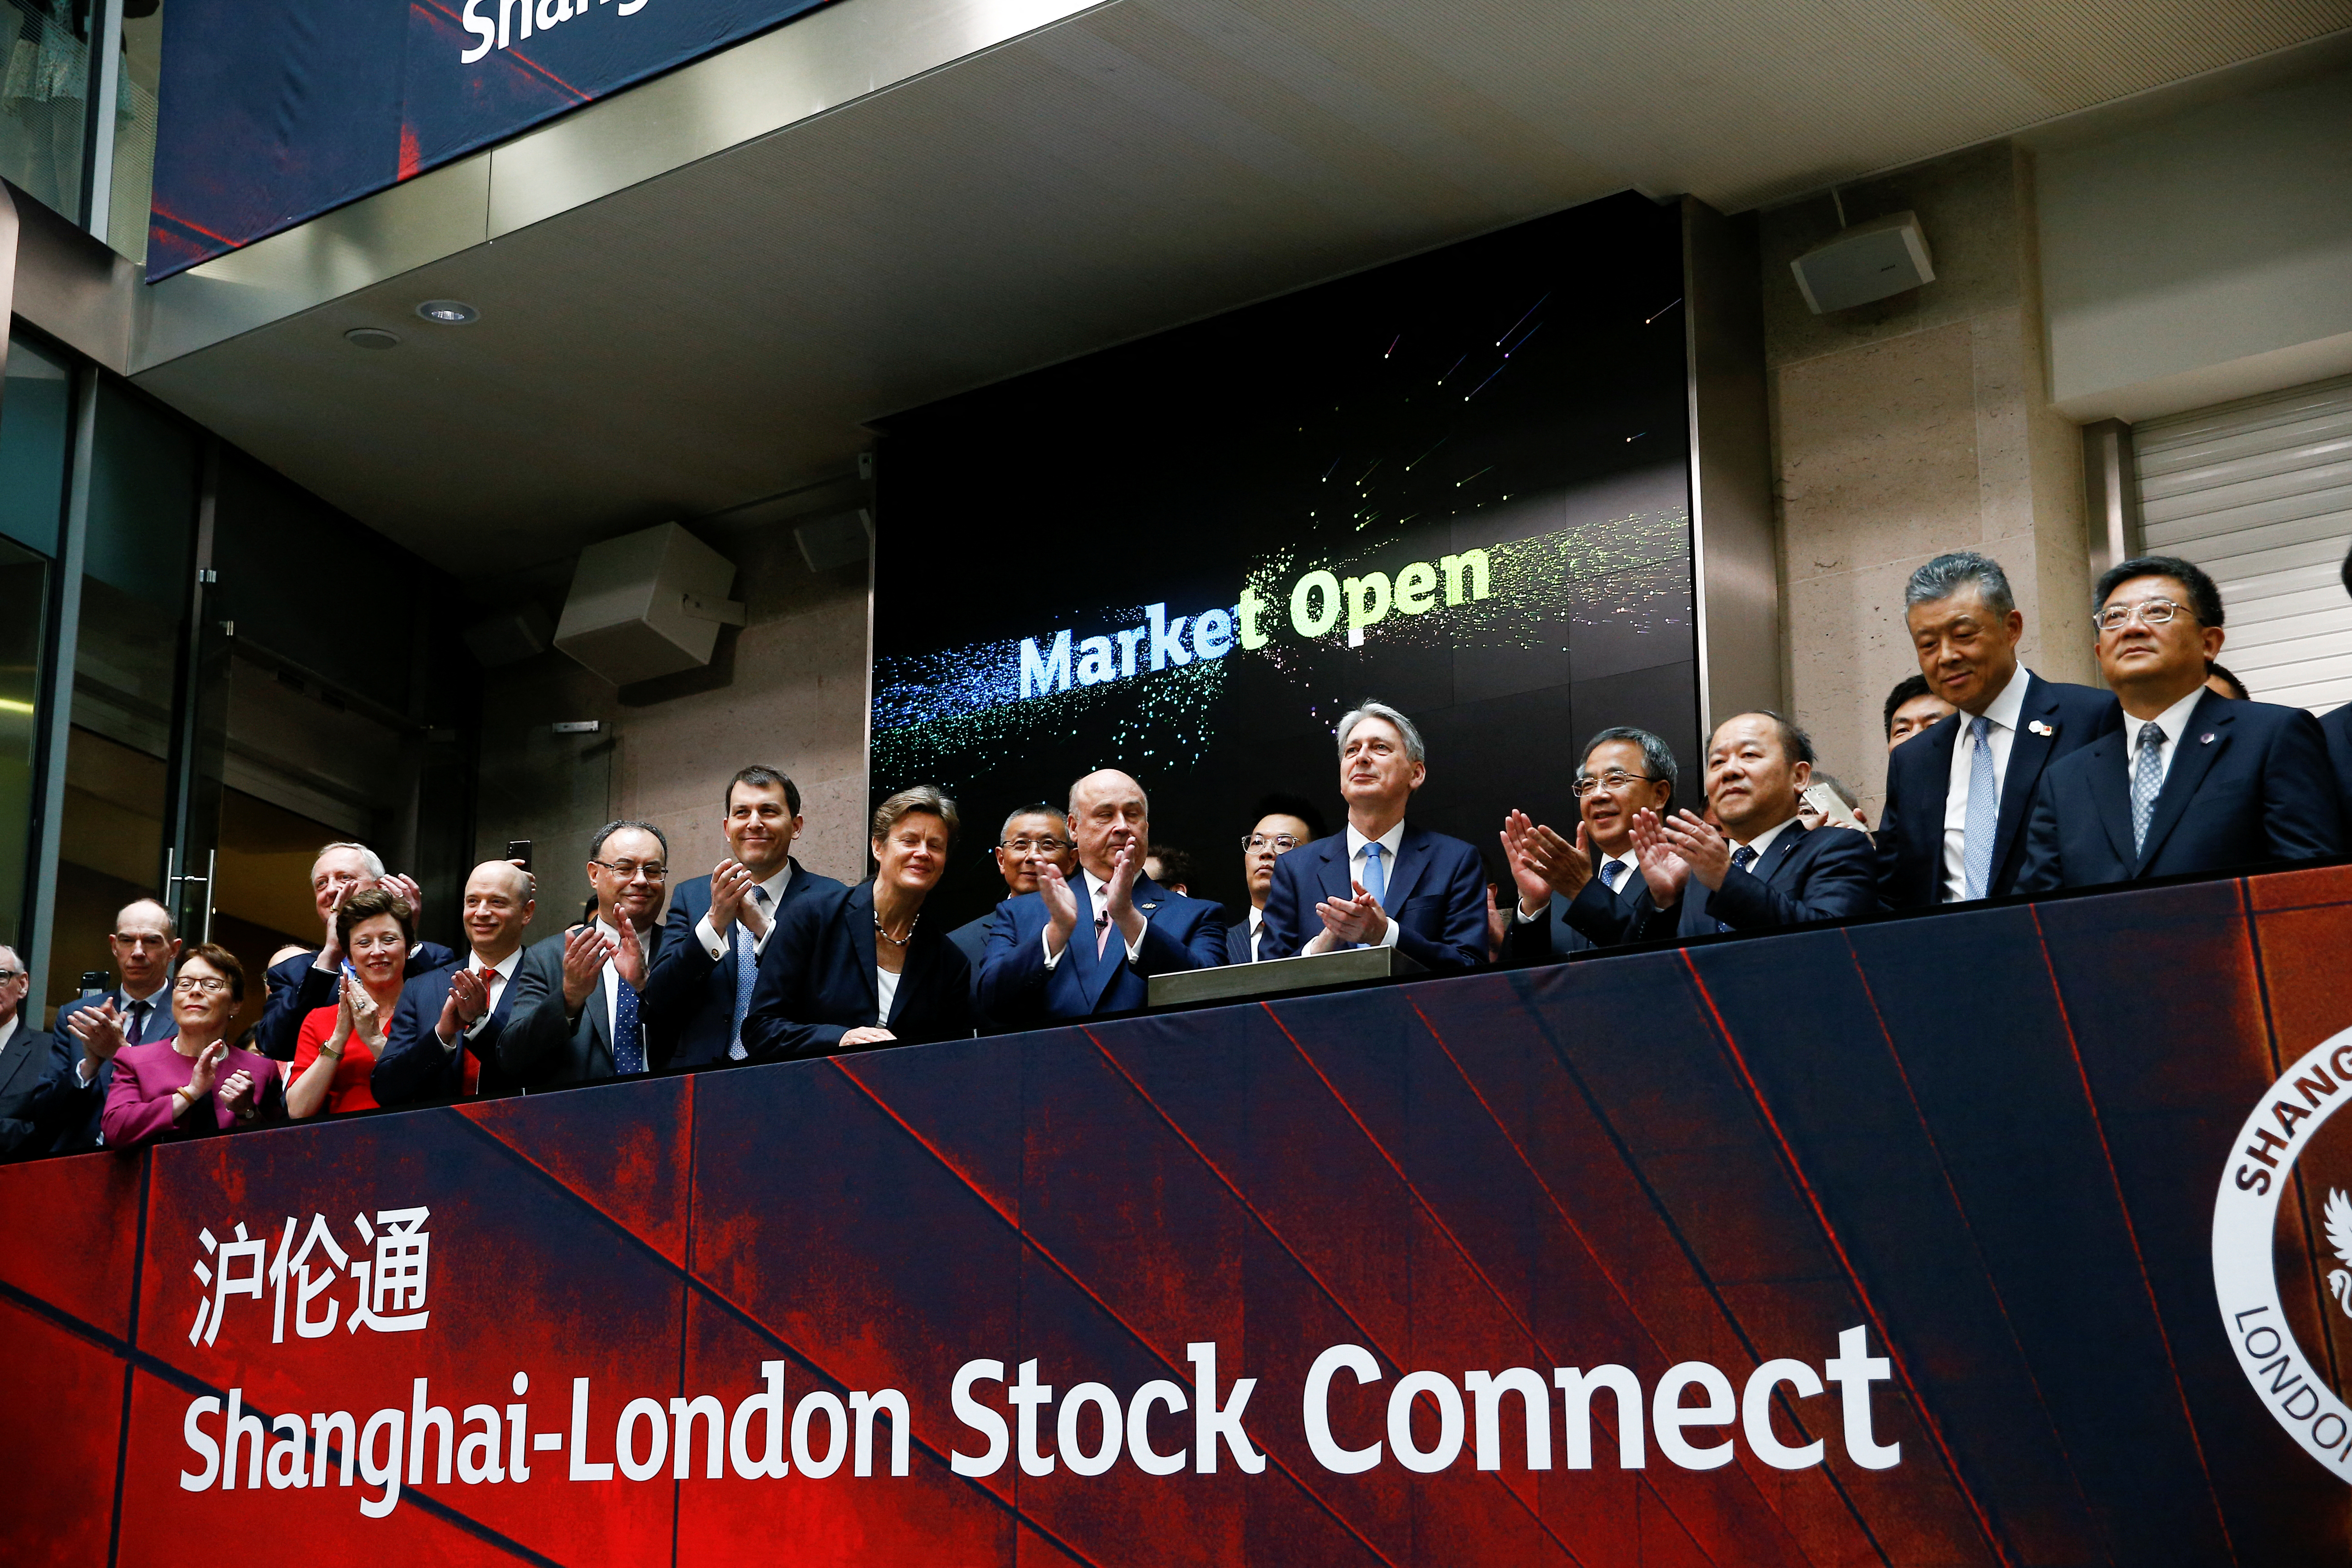 British Chancellor of the Exchequer Philip Hammond and Chinese Vice-Premier Hu Chunhua react after the opening of the markets at the London Stock Exchange in London